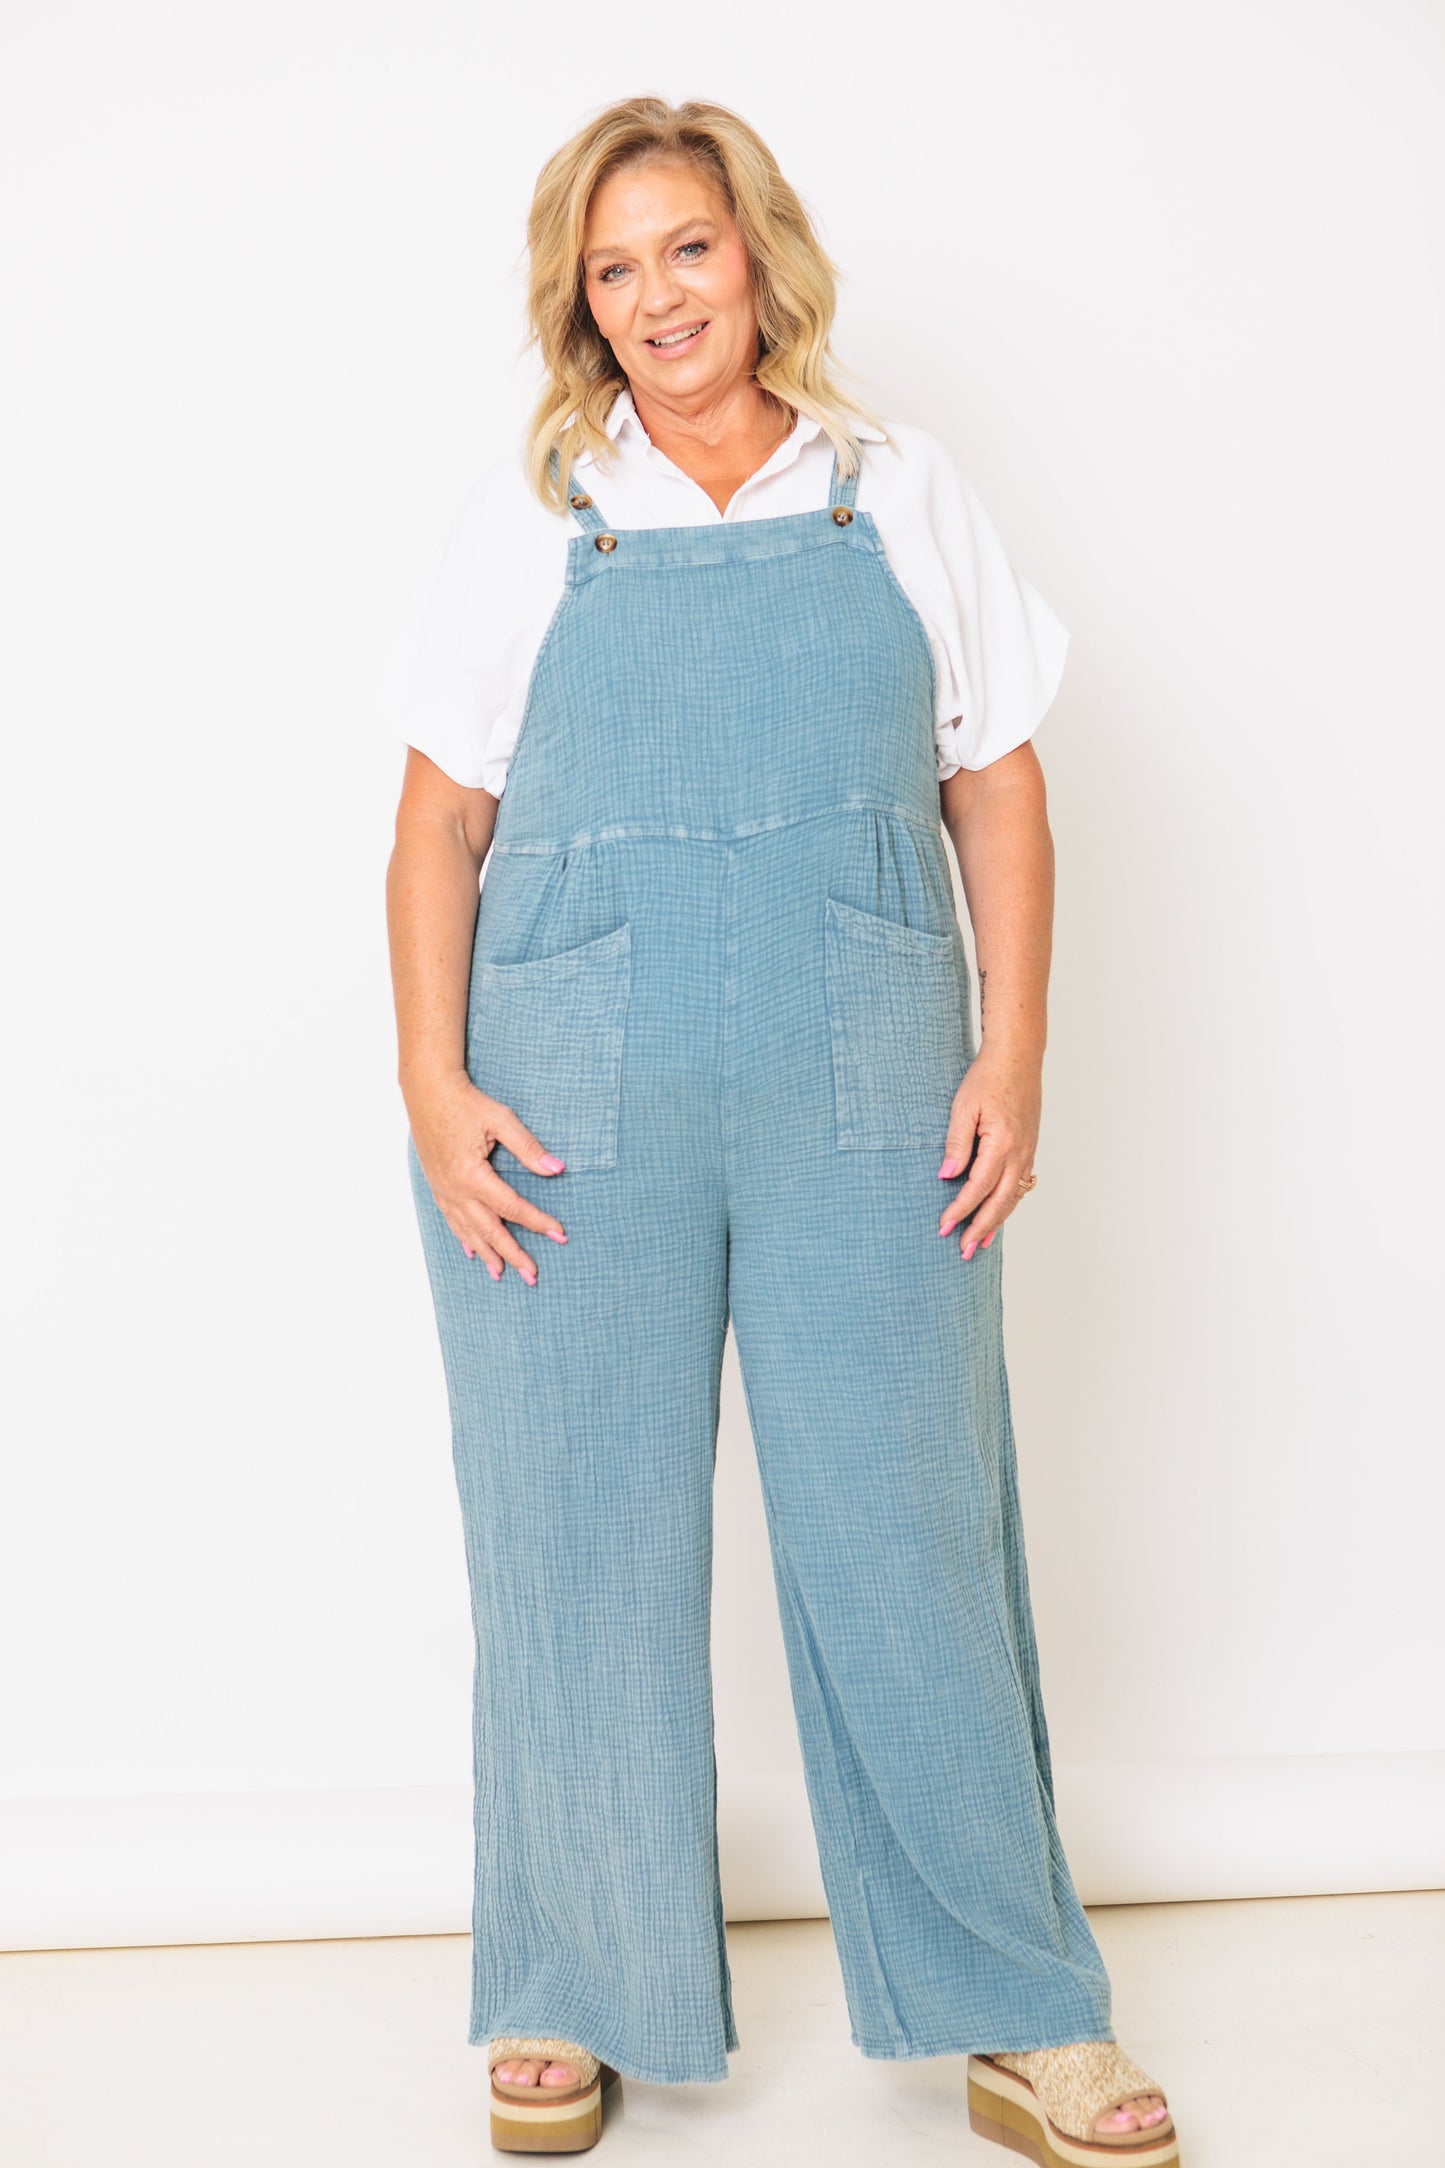 You're Mine Mineral Washed Overalls (S-3XL)